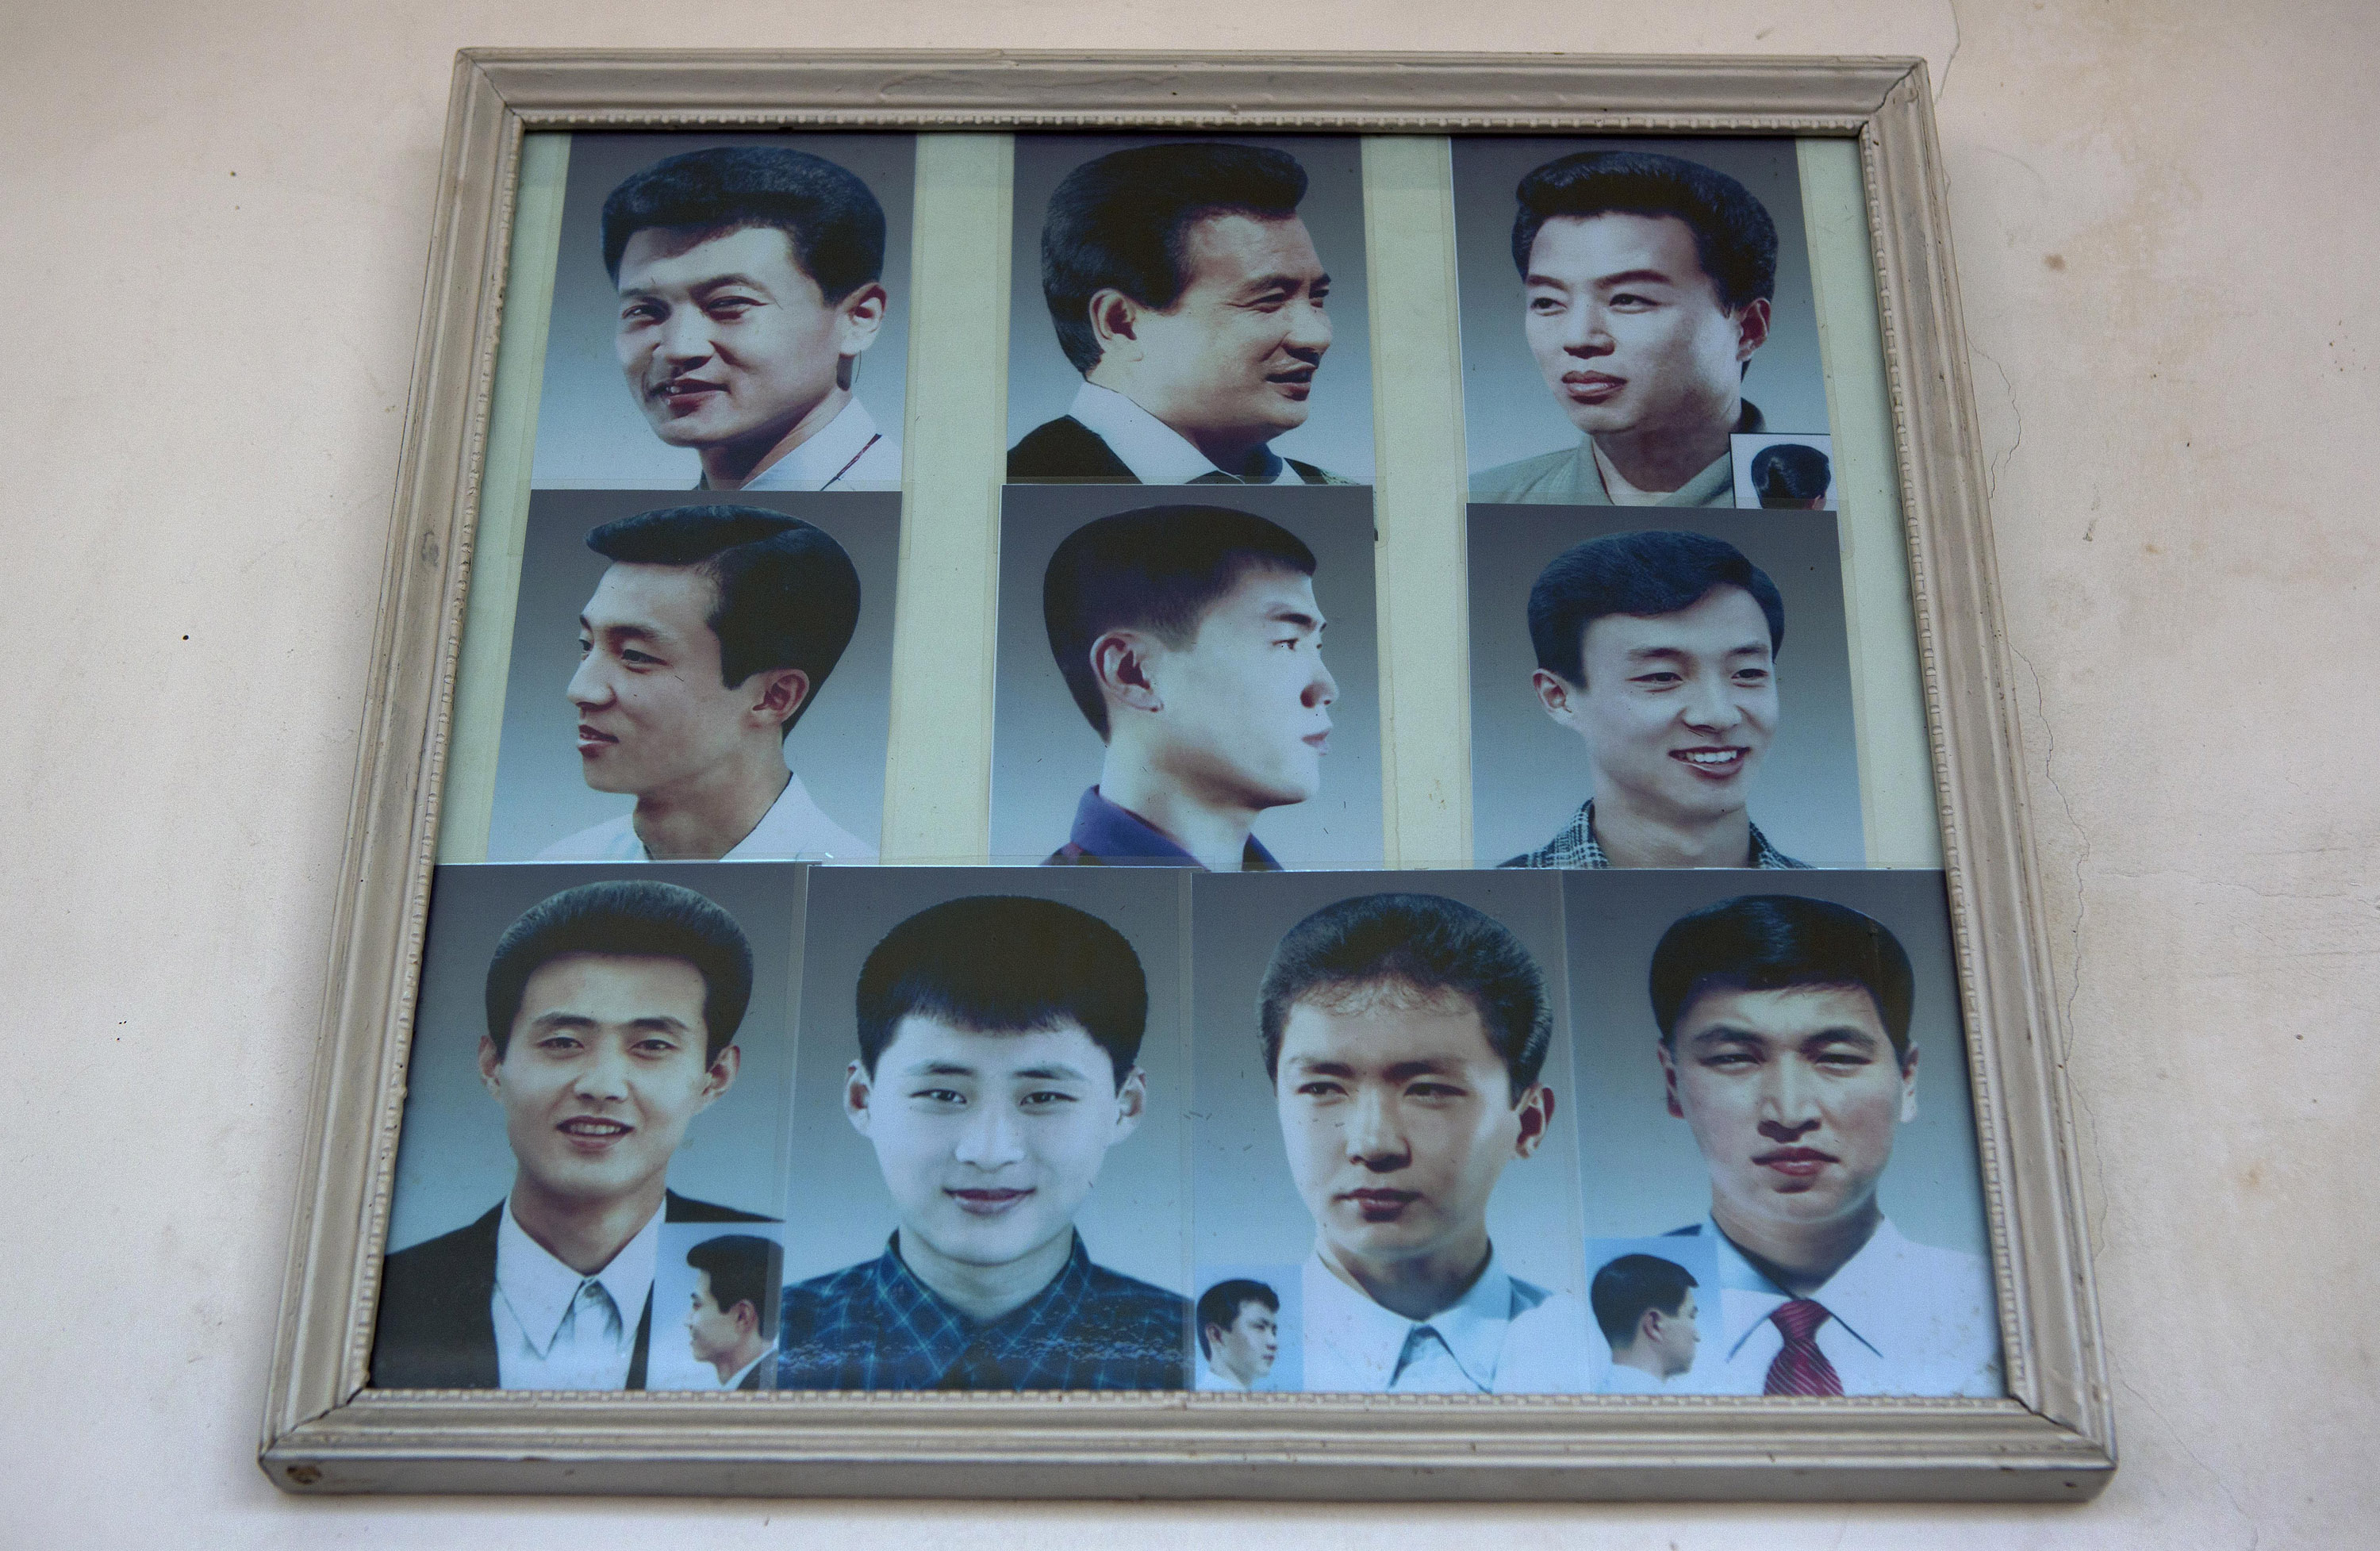 Photos showing example hair styles hang inside a barber shop in Pyongyang, North Korea on Feb. 20, 2013.